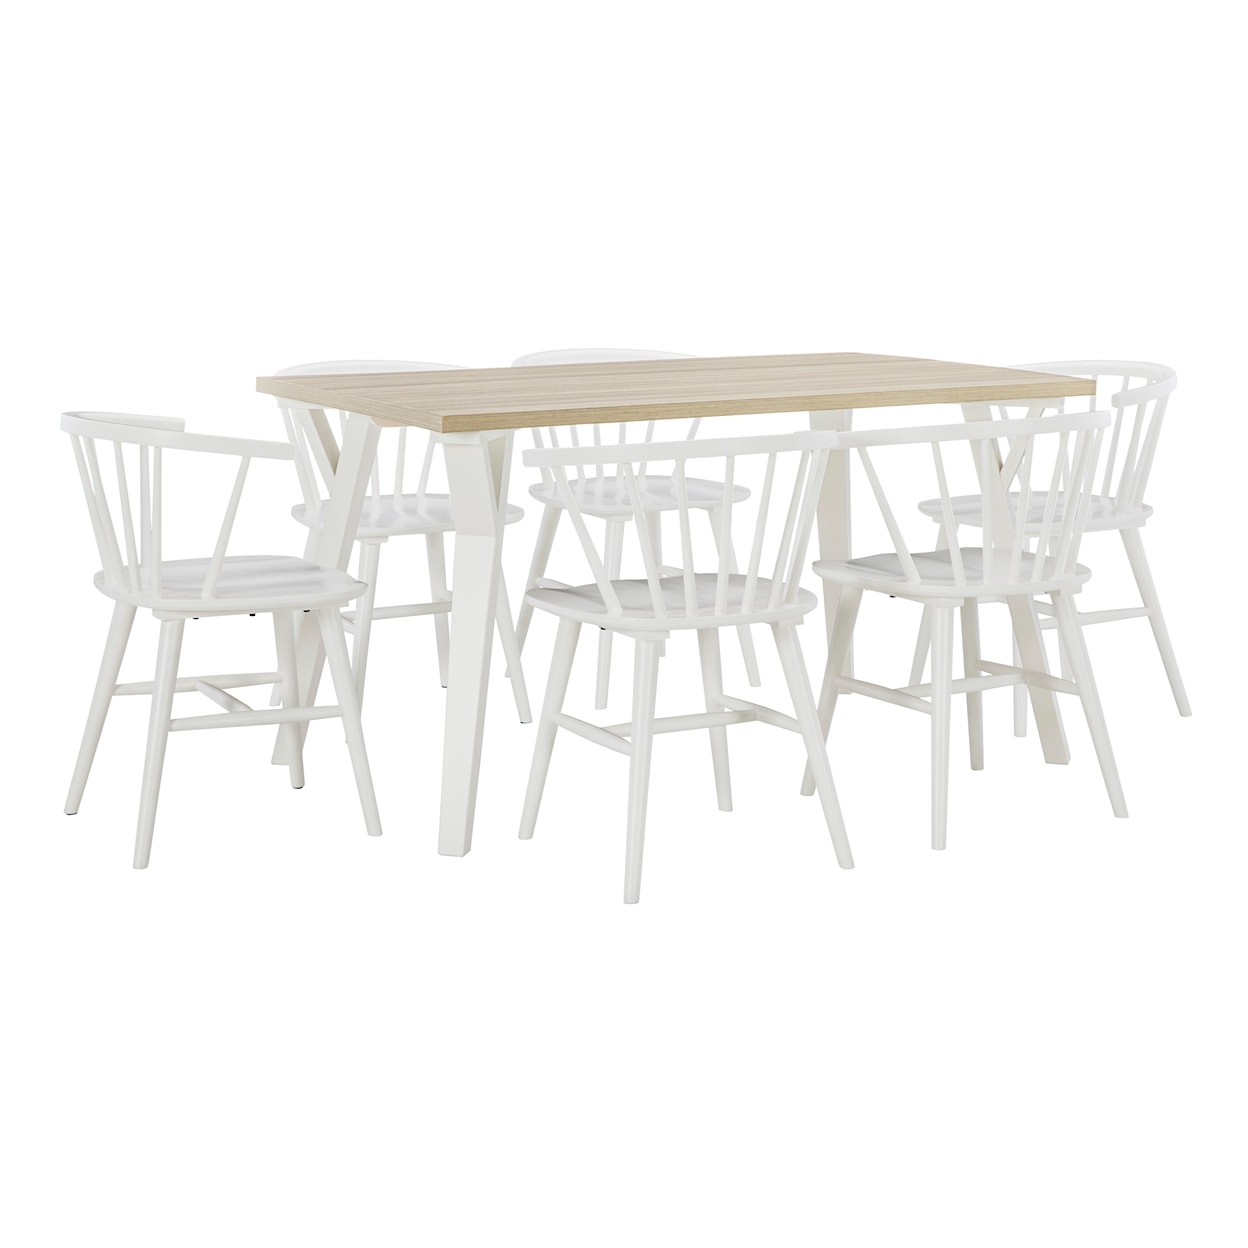 Signature Design by Ashley Grannen Dining Table and 6 Chairs